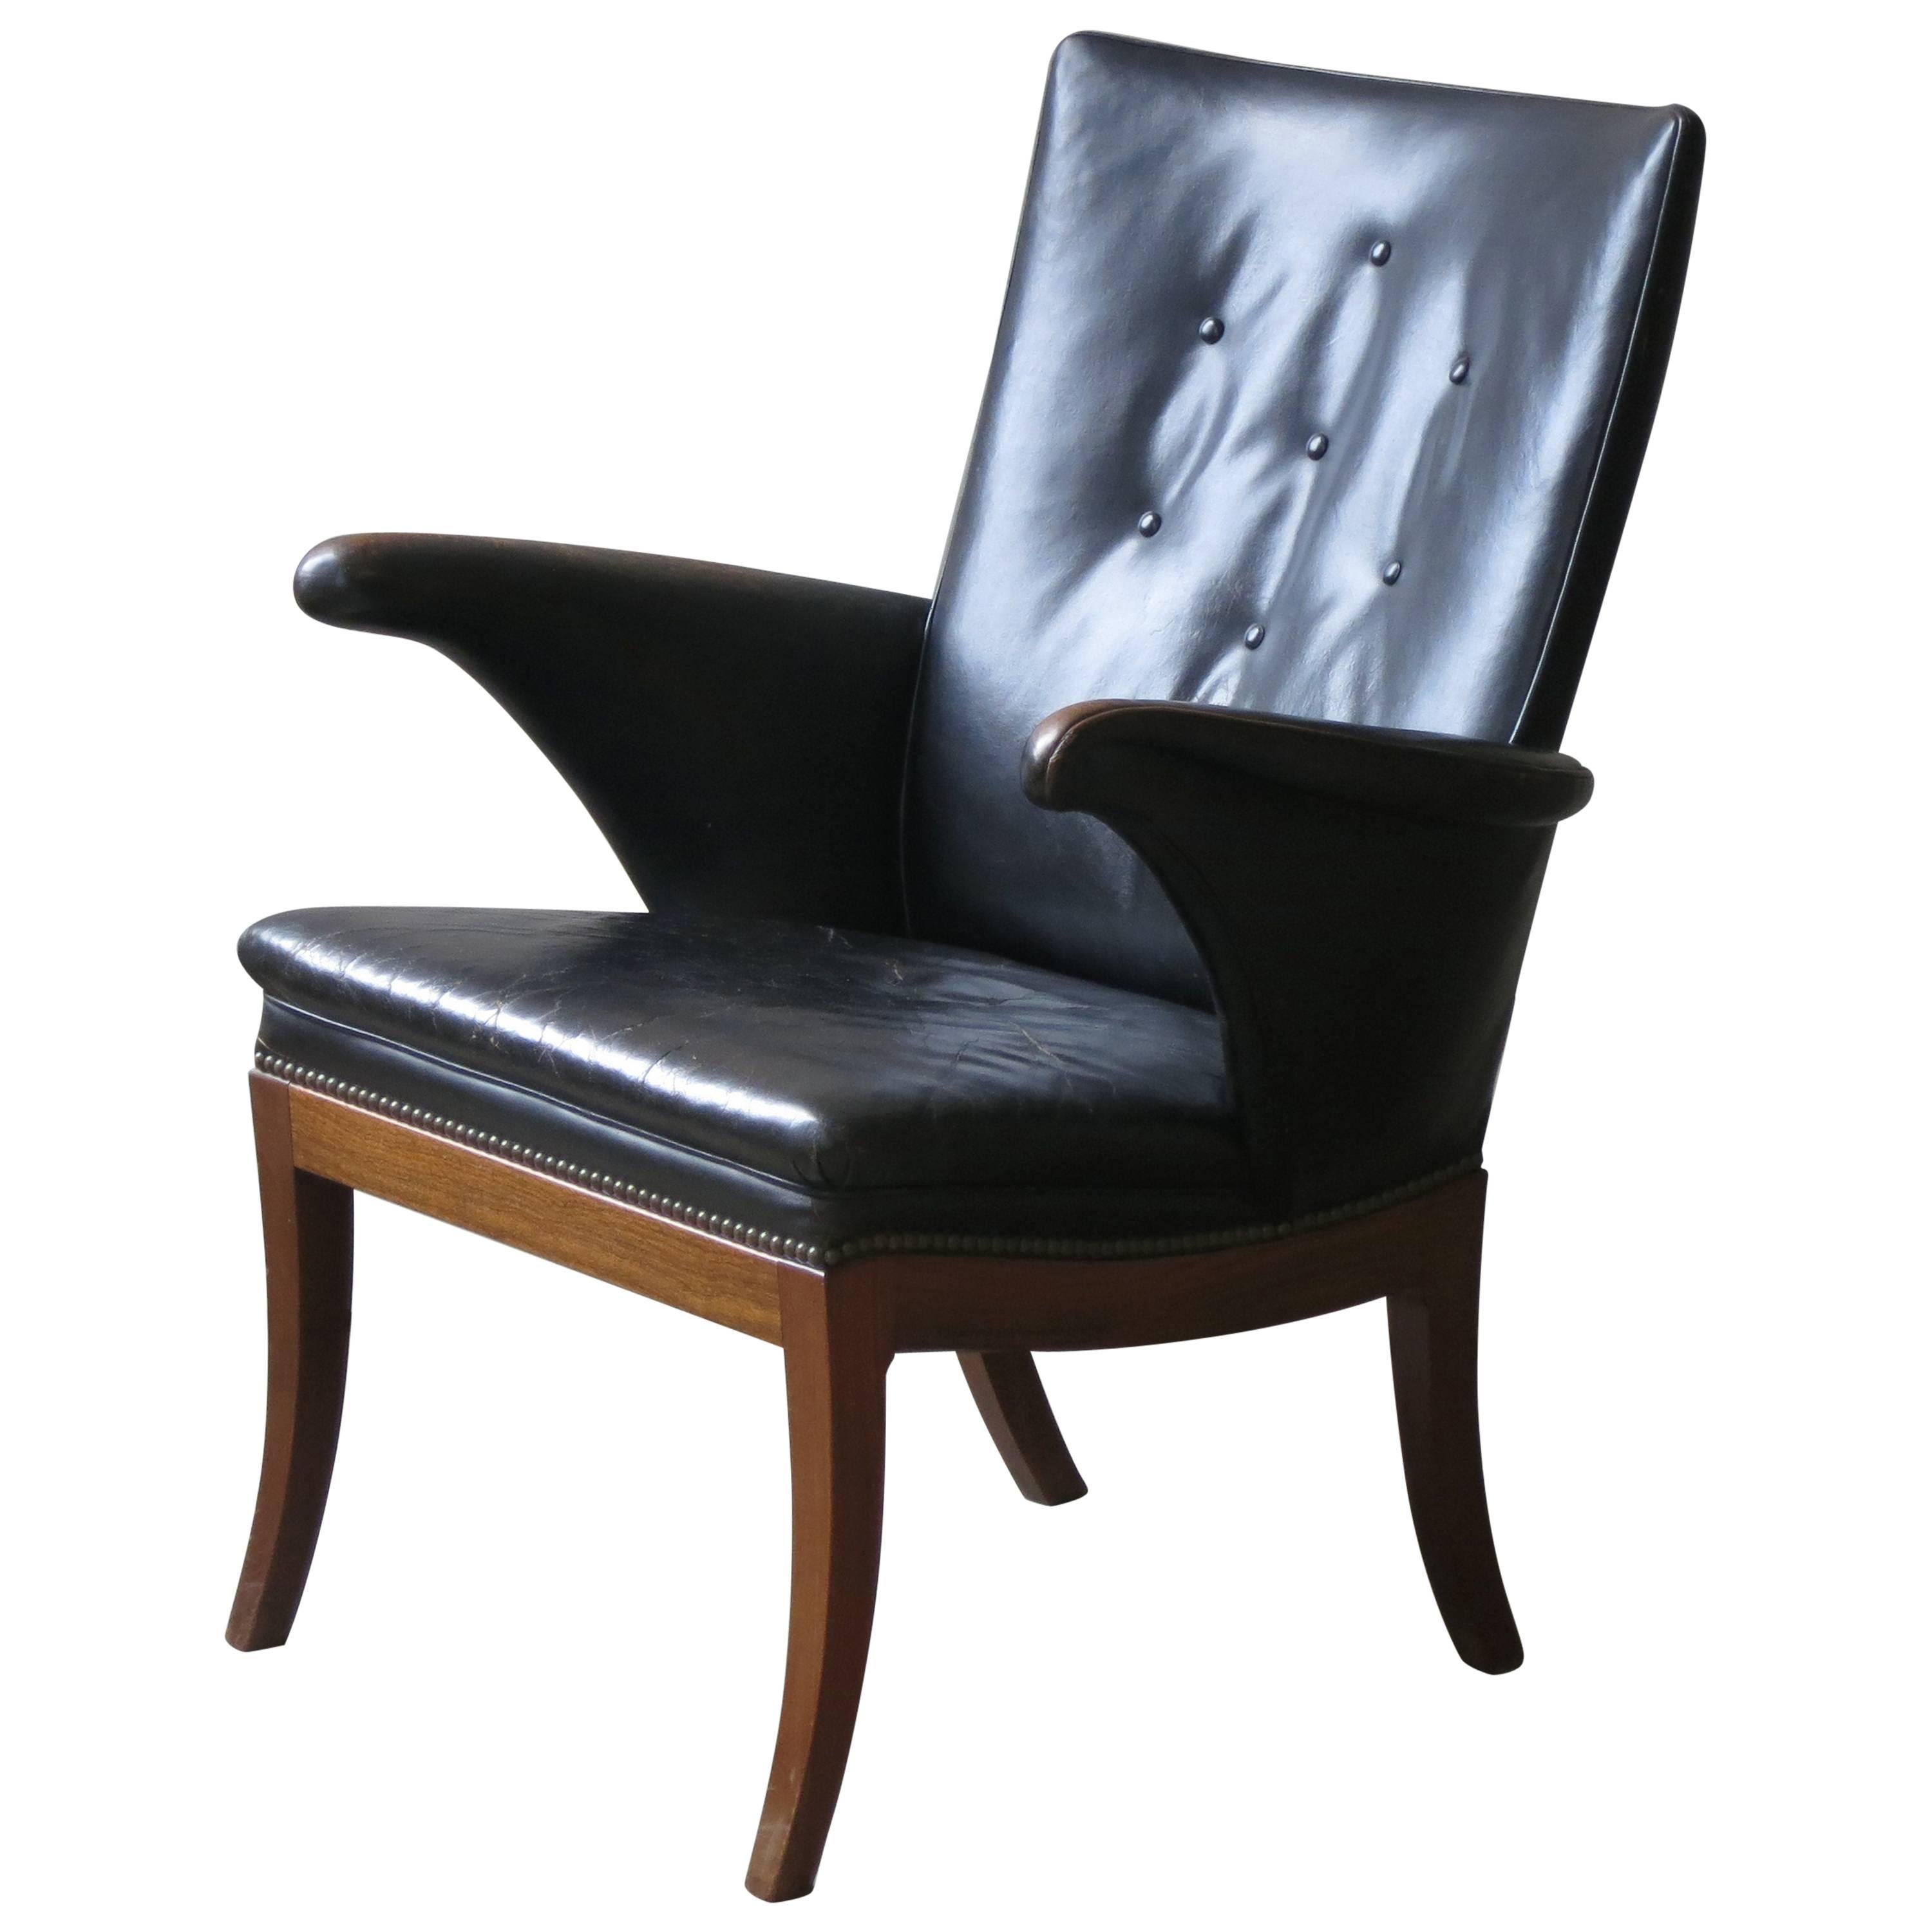 Armchair in Original Black-Brown Leather by Frits Henningsen, 1930s For Sale